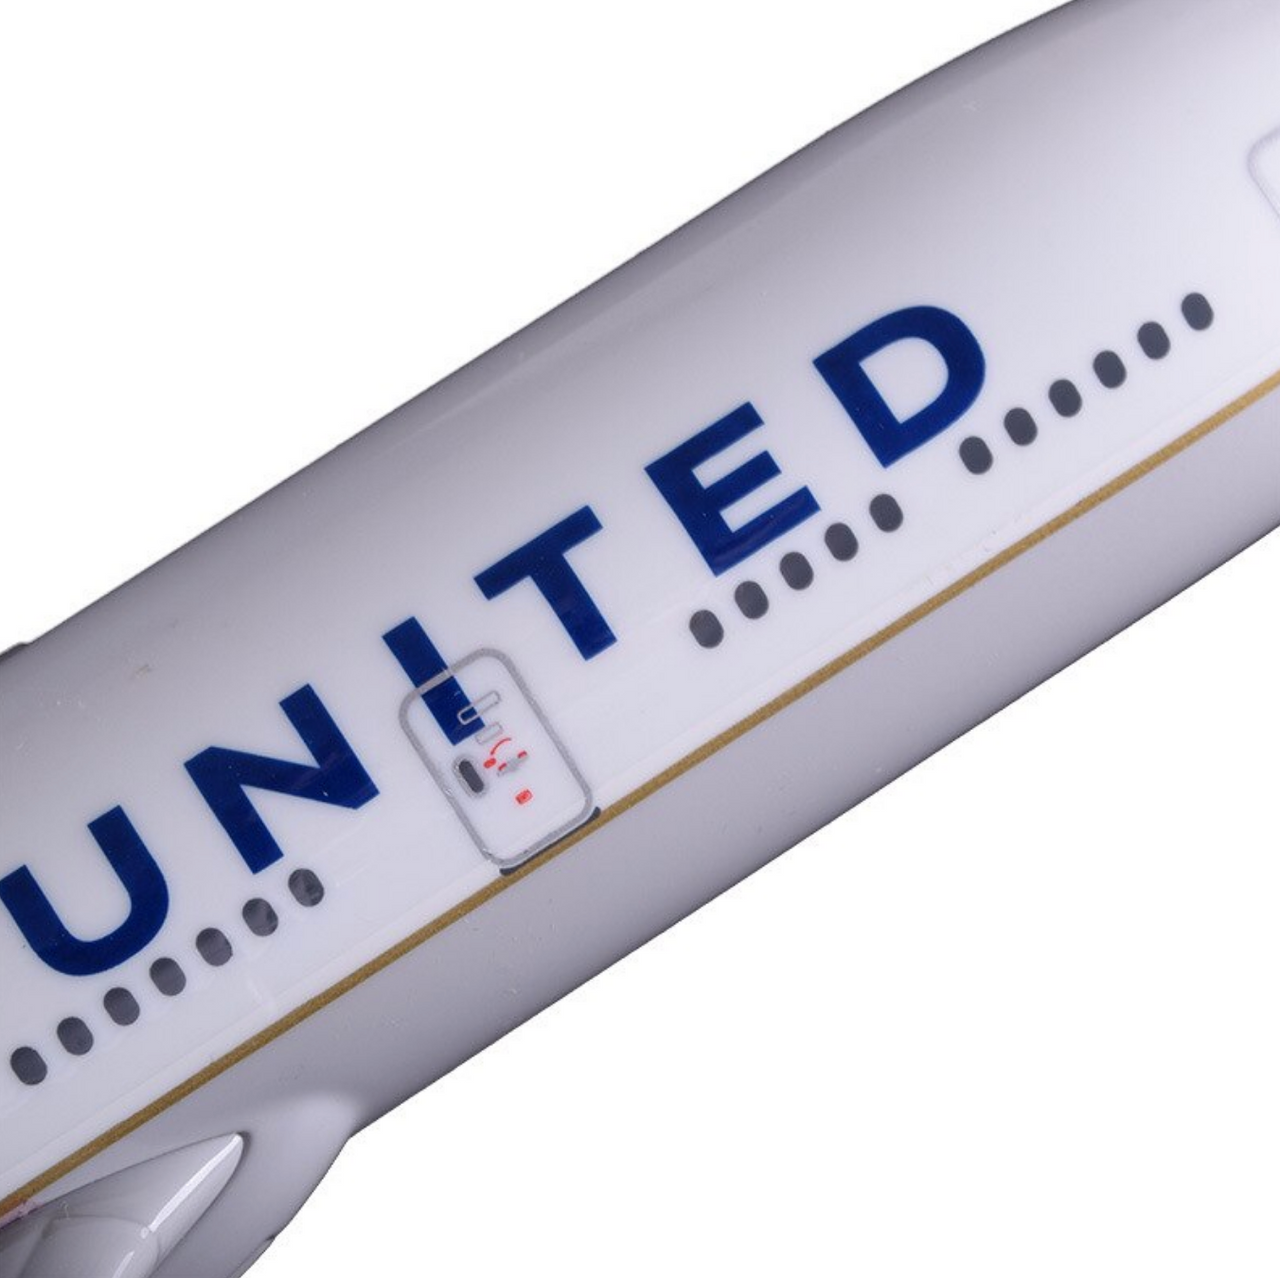 United Boeing 777 Airplane Model (Special Model 47CM)